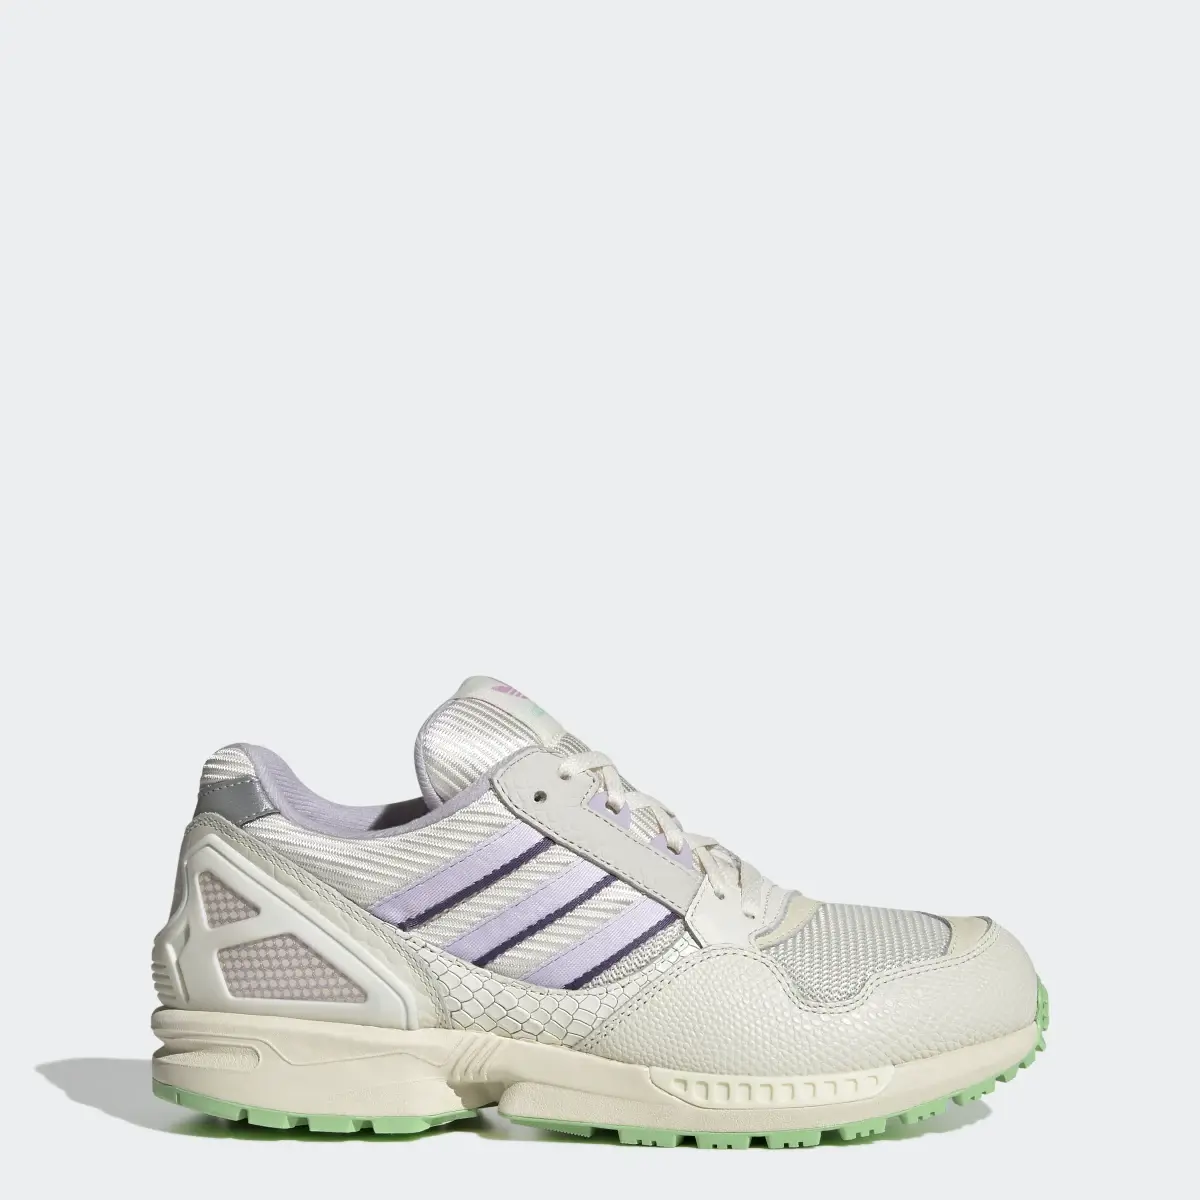 Adidas ZX 9020 Shoes. 1